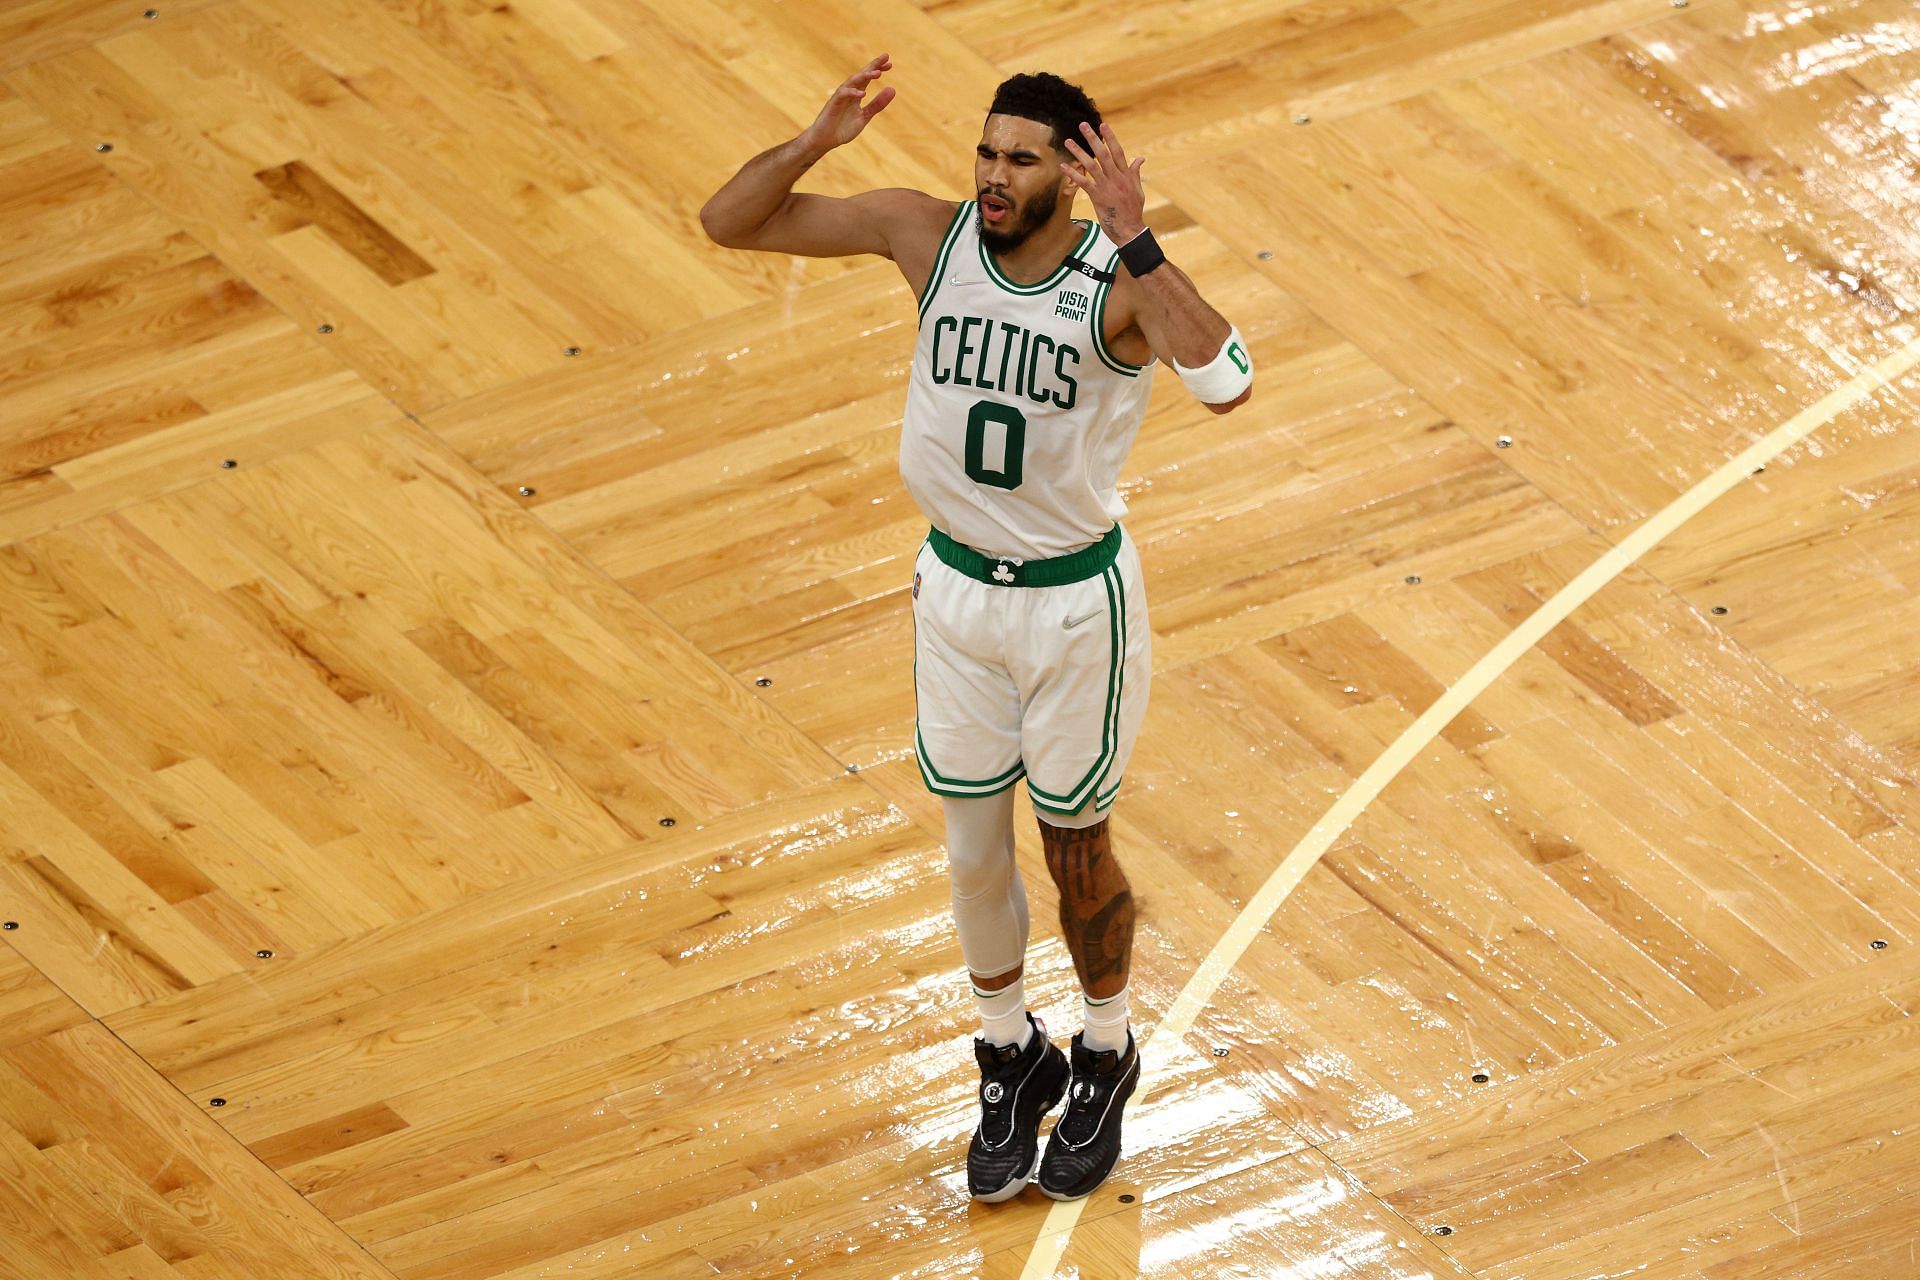 Jayson Tatum of the Boston Celtics reacts in the fourth quarter against the Golden State Warriors during Game 3 of the NBA Finals at TD Garden on Wednesday in Boston, Massachusetts